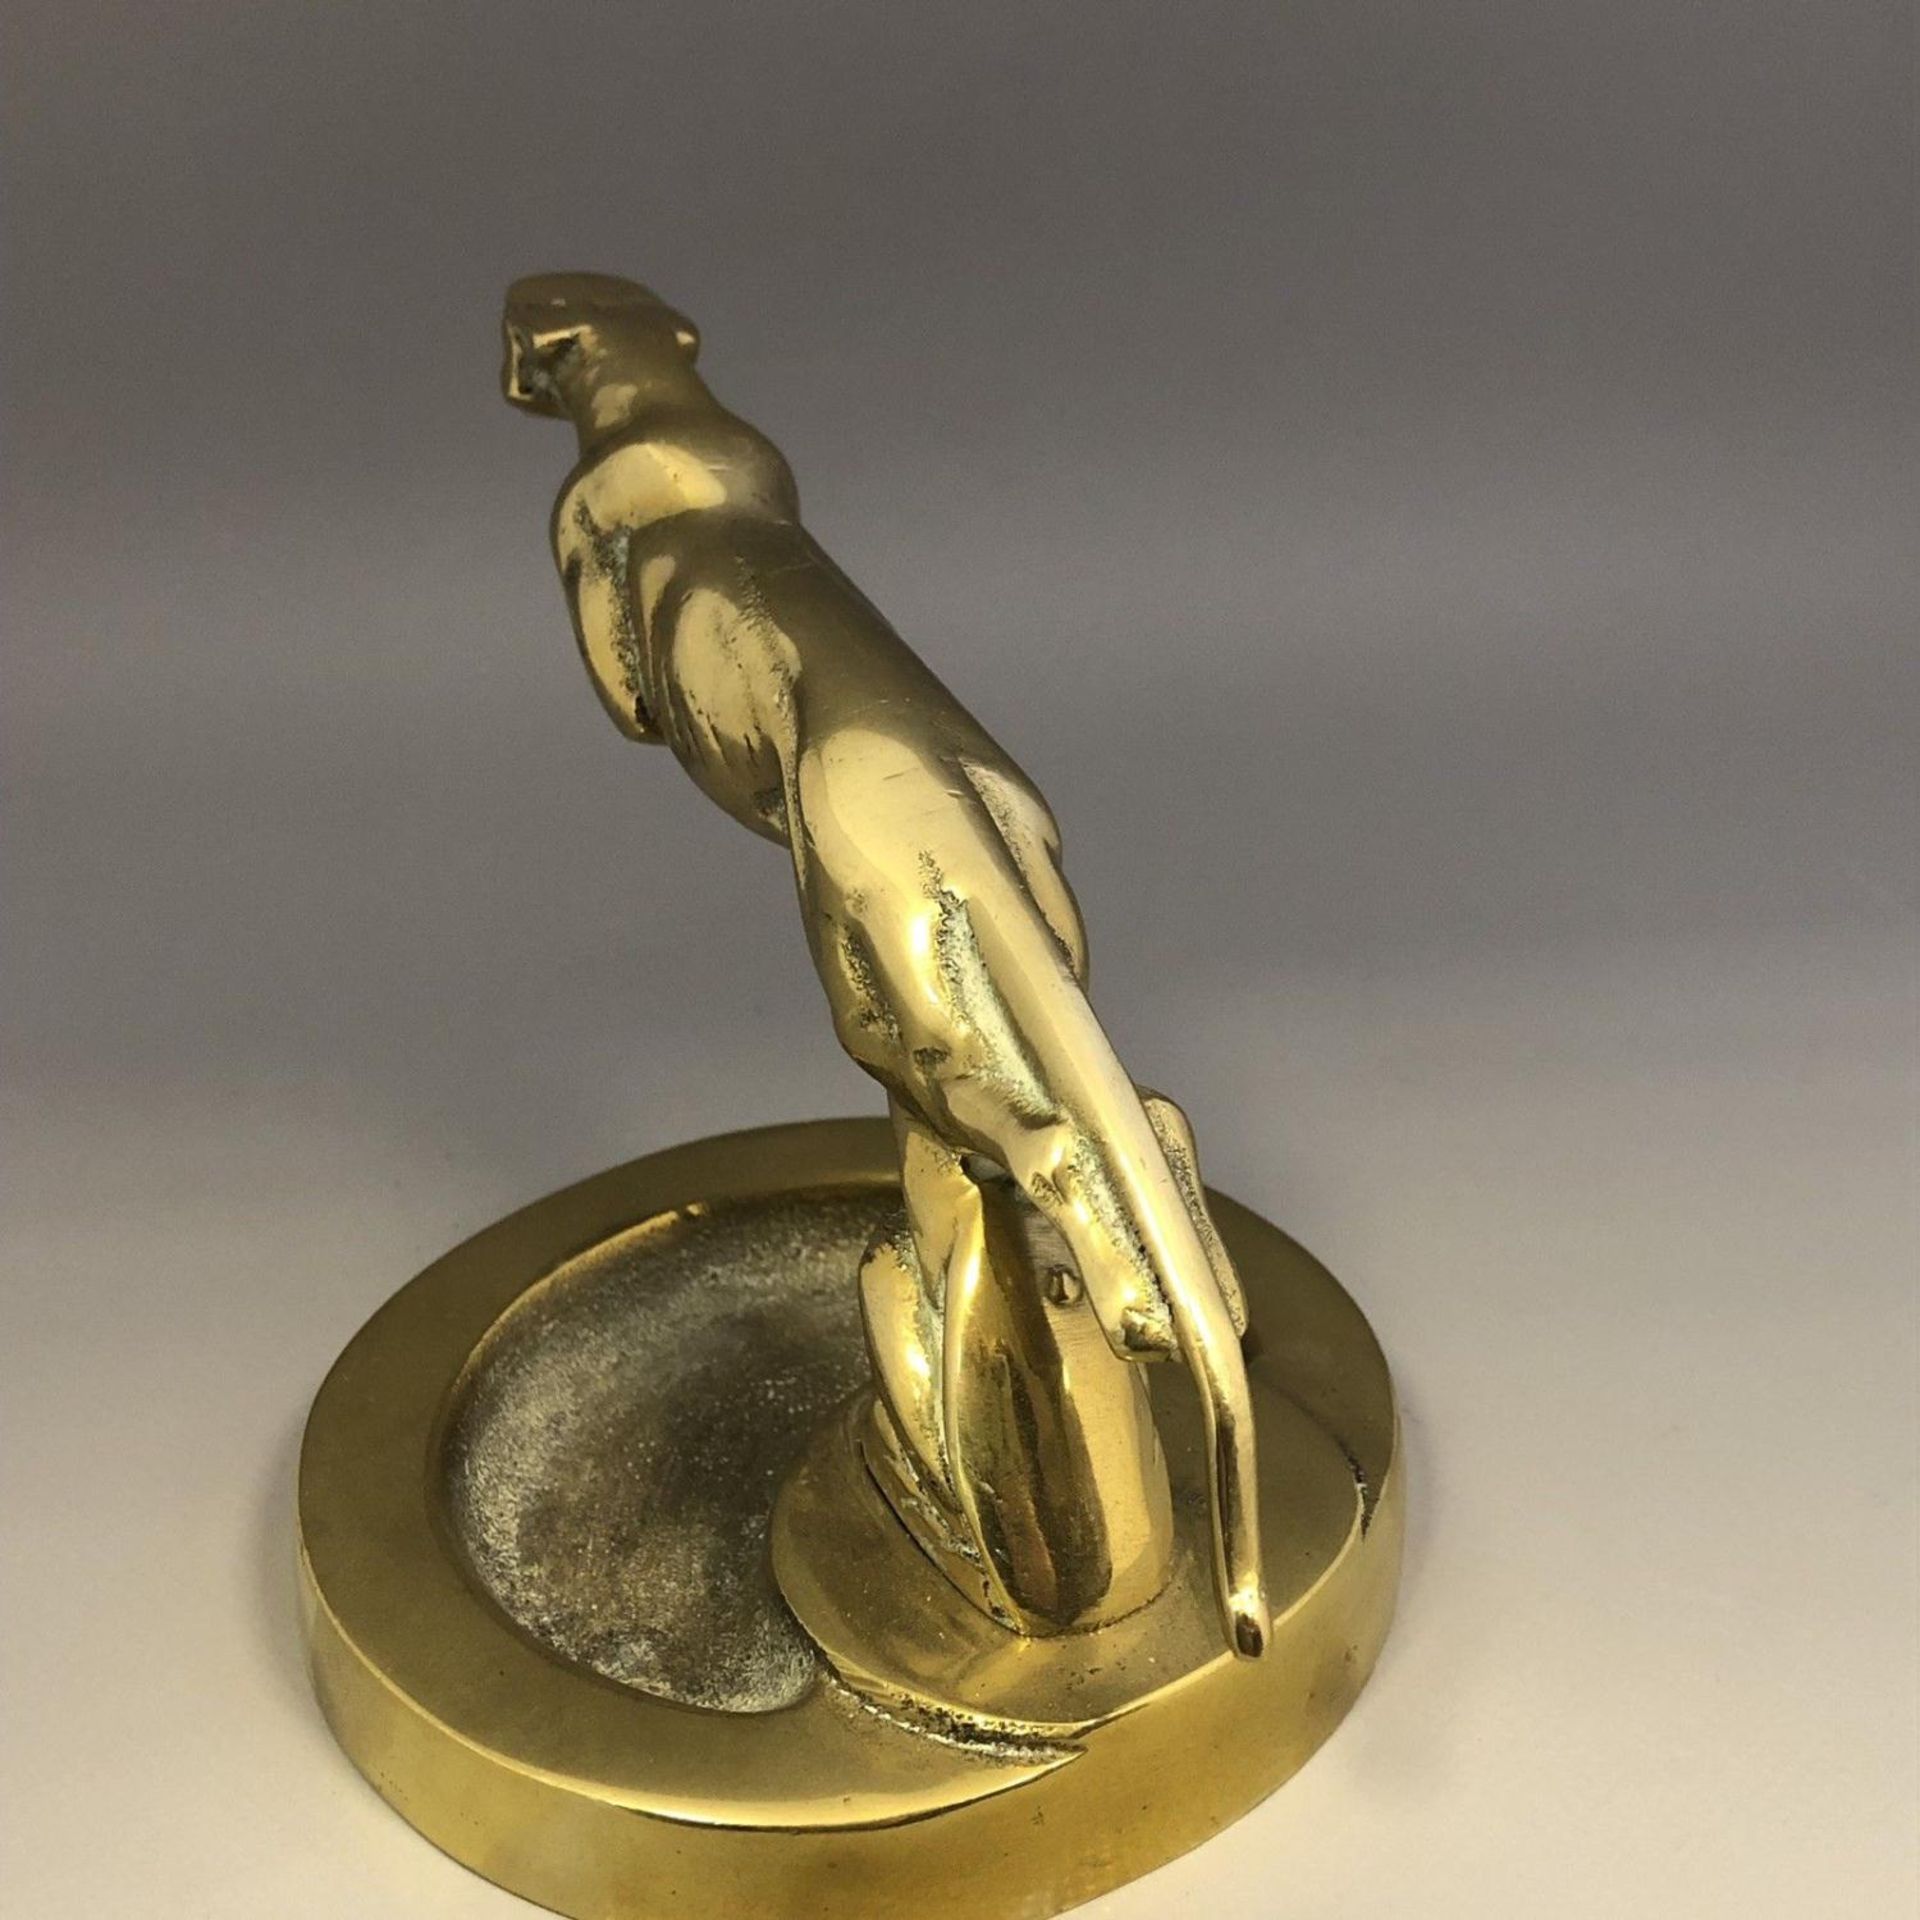 Vintage cast brass ashtray with leaping jaguar mount car mascot - Image 4 of 6